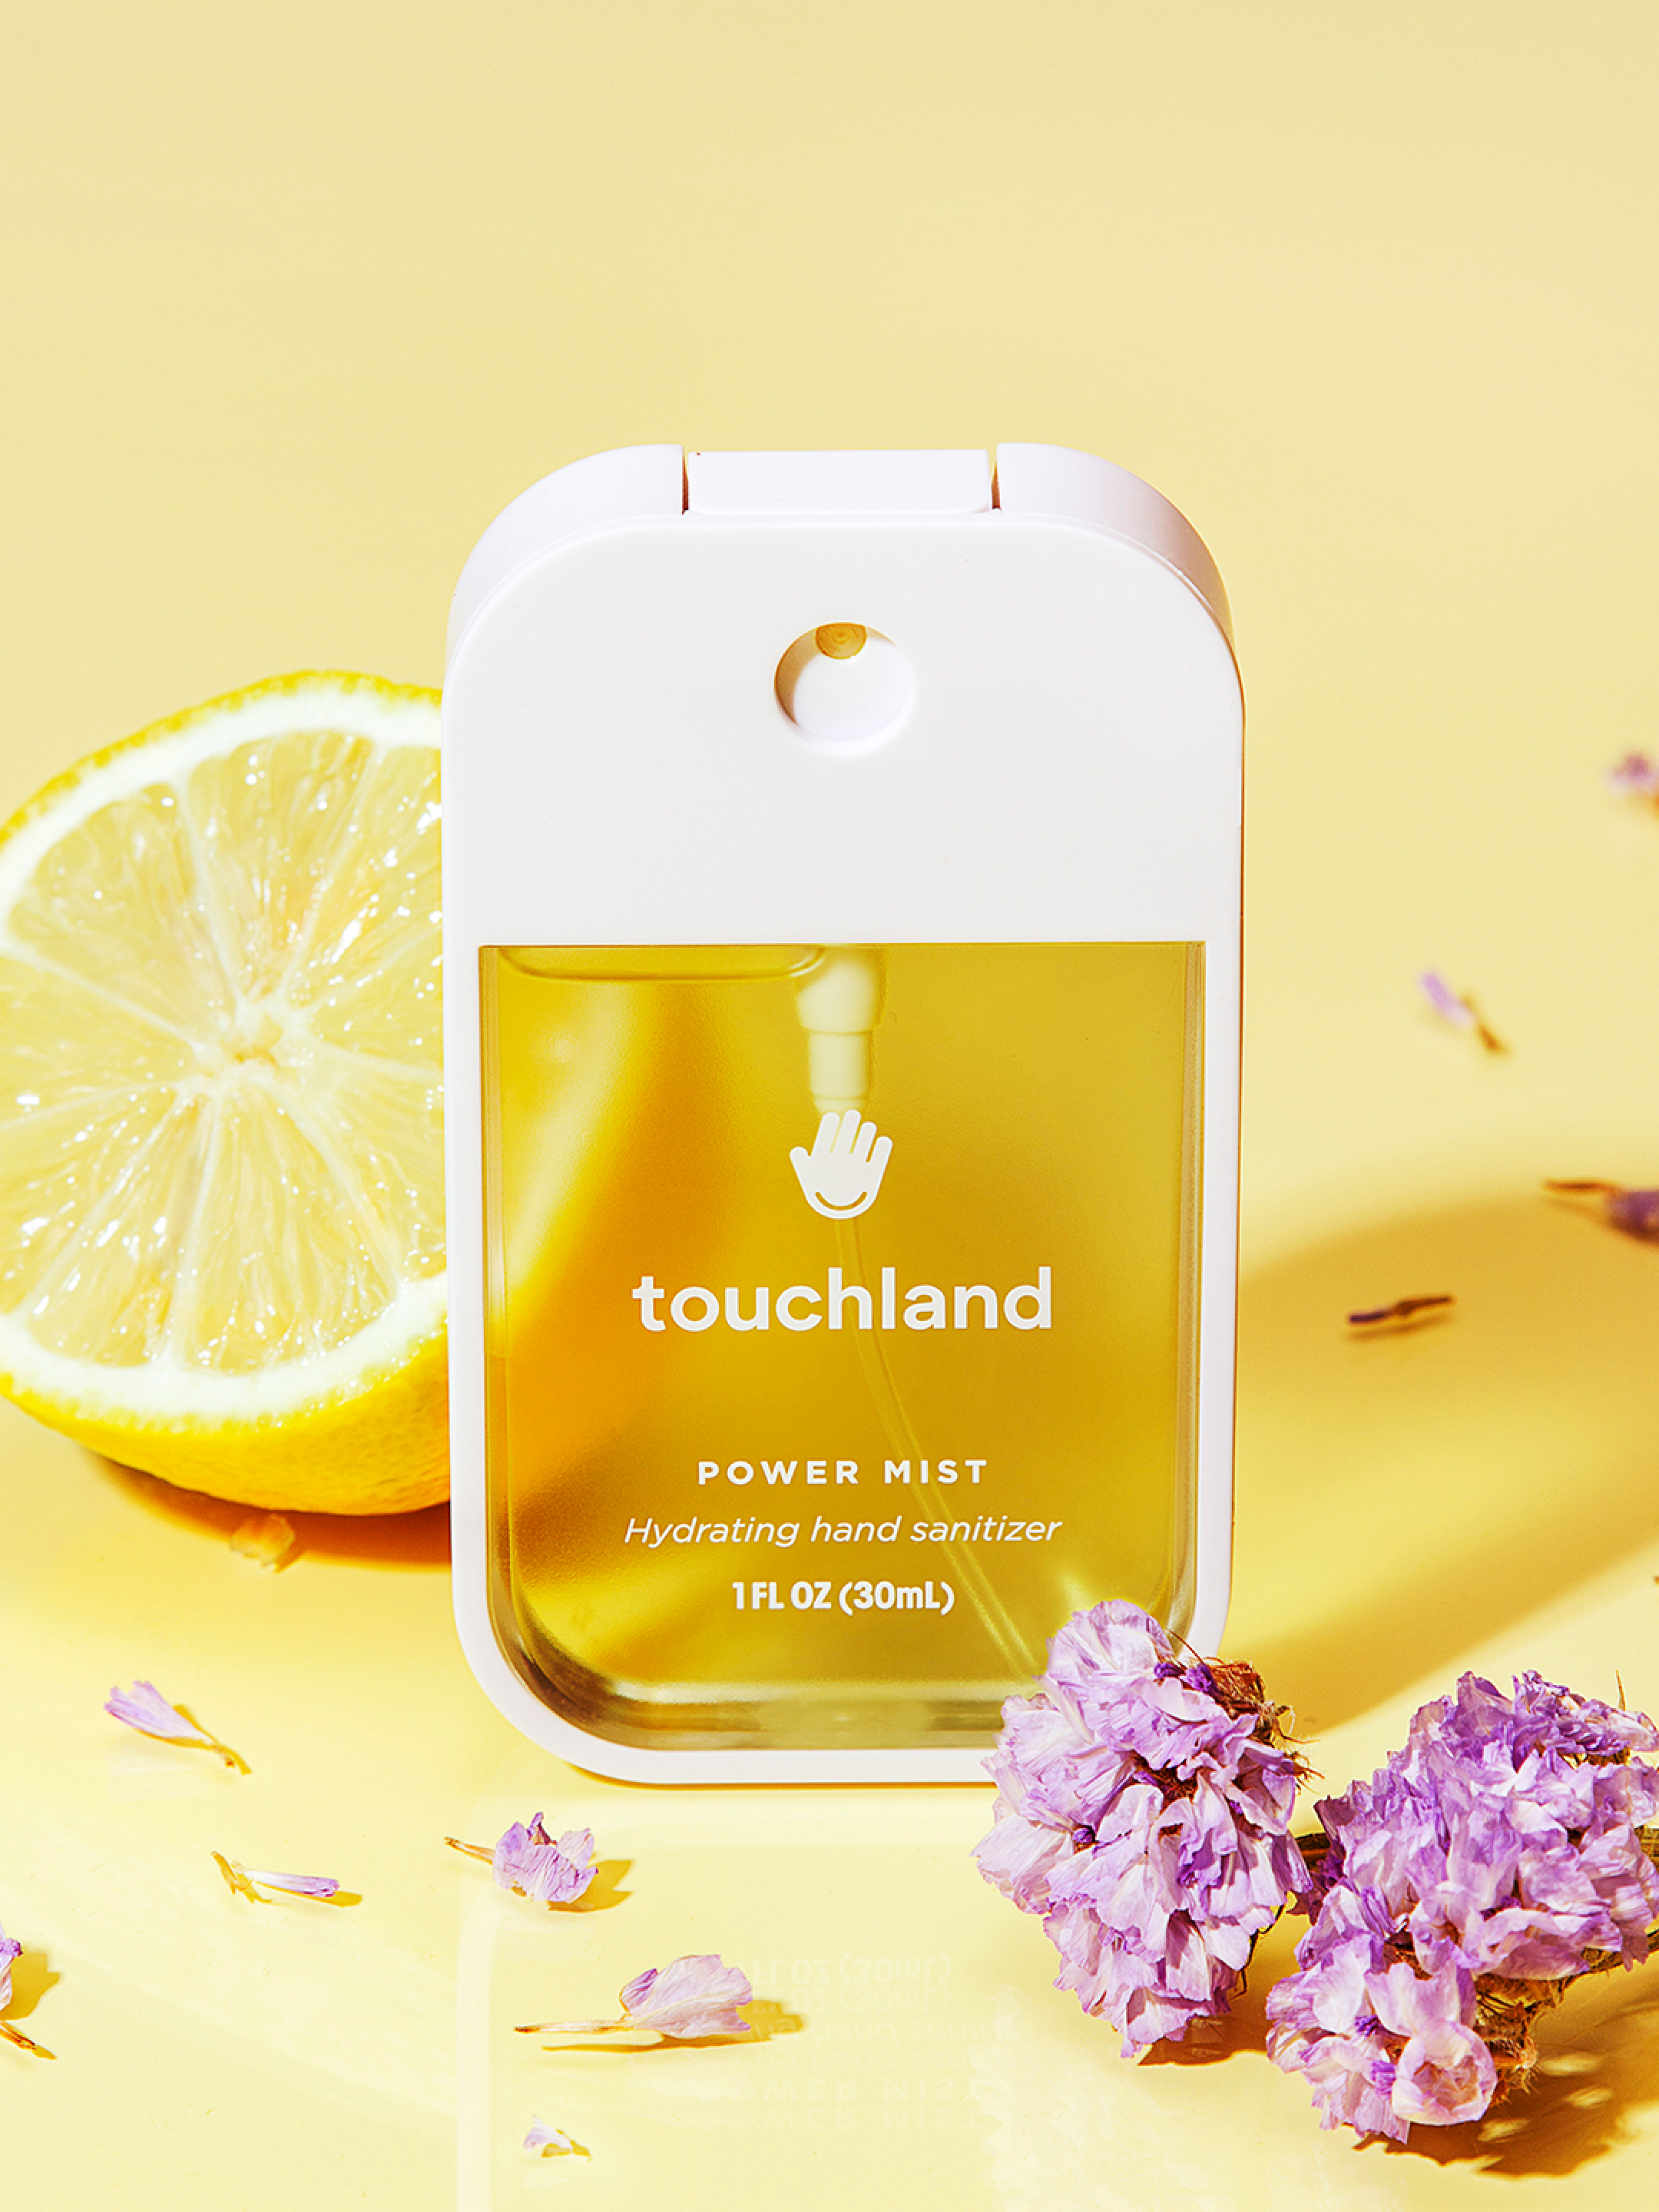 Lemon lime spritz yellow power mist with lemon and lavender on yellow background